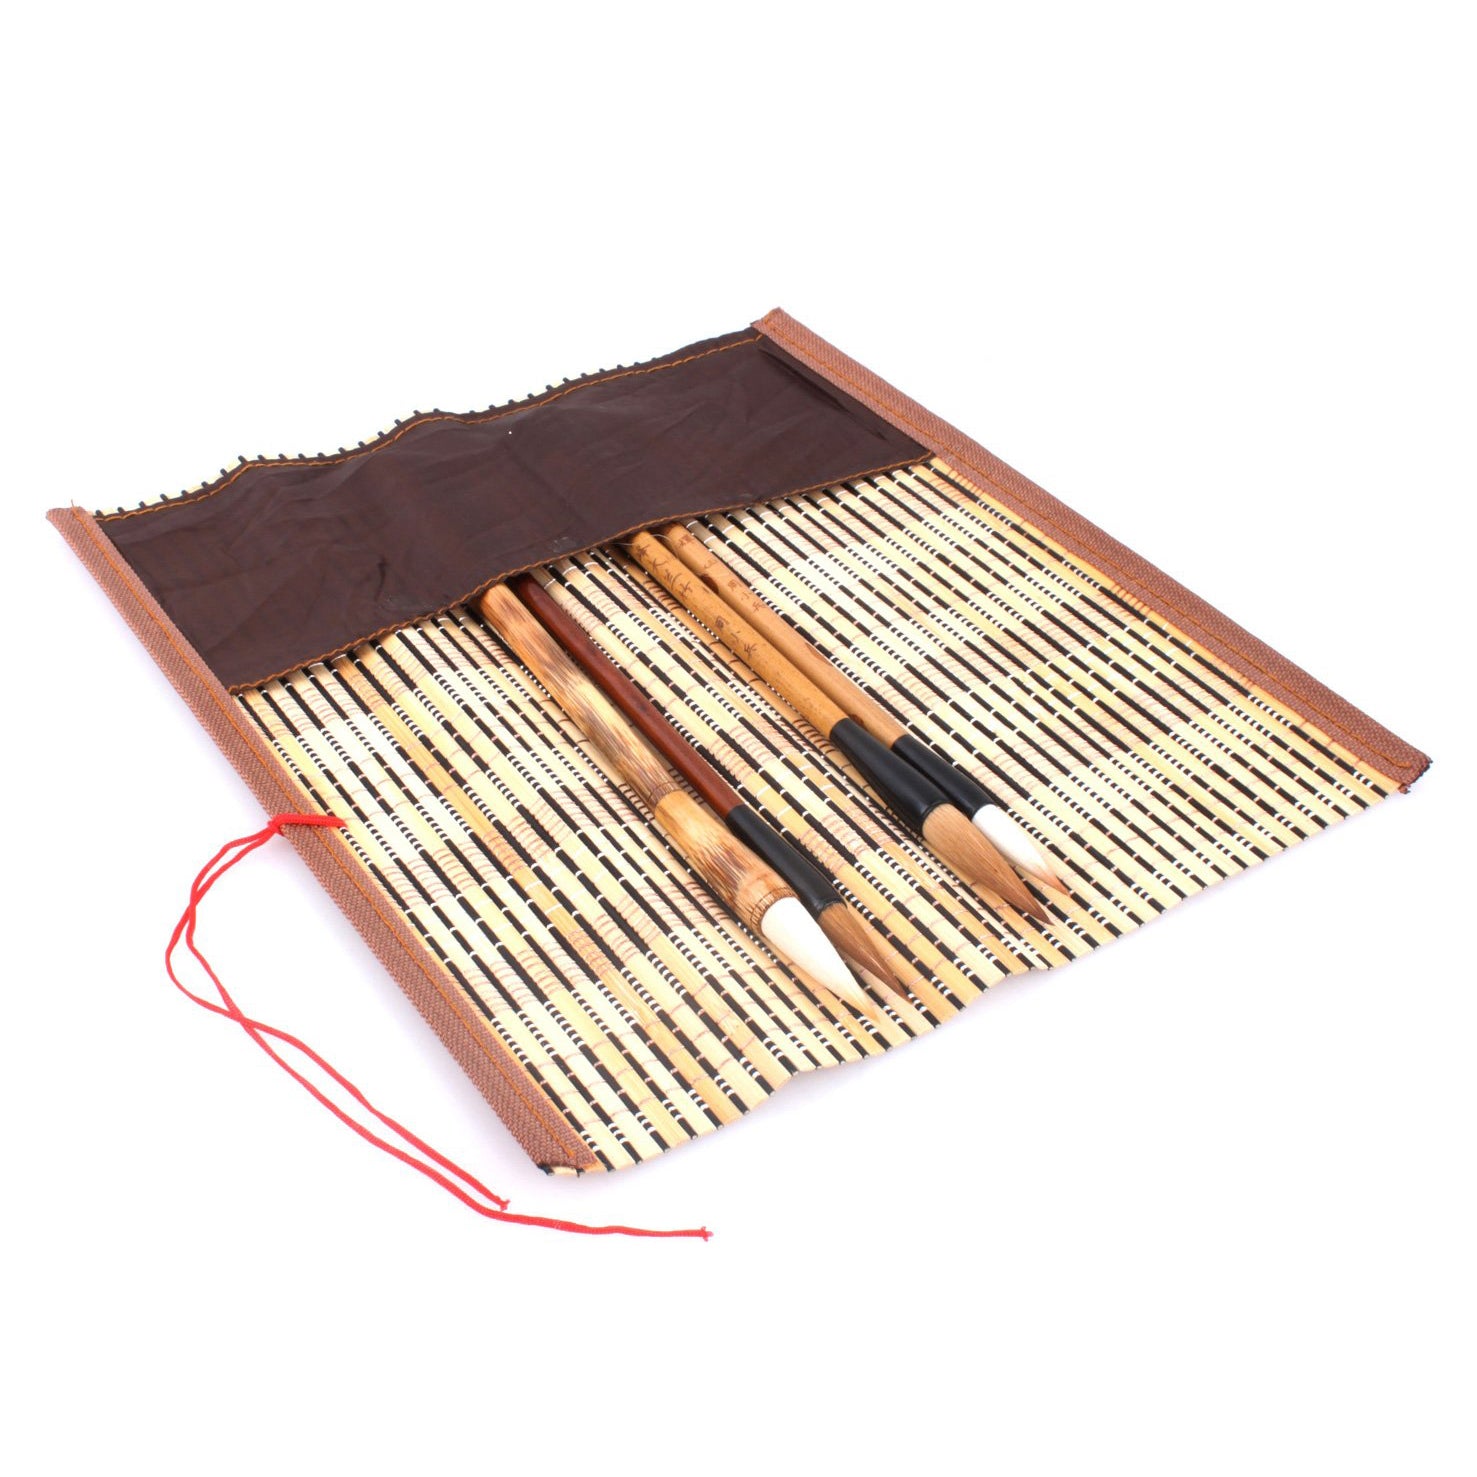 usage view of the bamboo brush wrap with pocket. This product is made of bamboo strips with a cloth pocket at one site where your brushes could be well positioned and protected inside